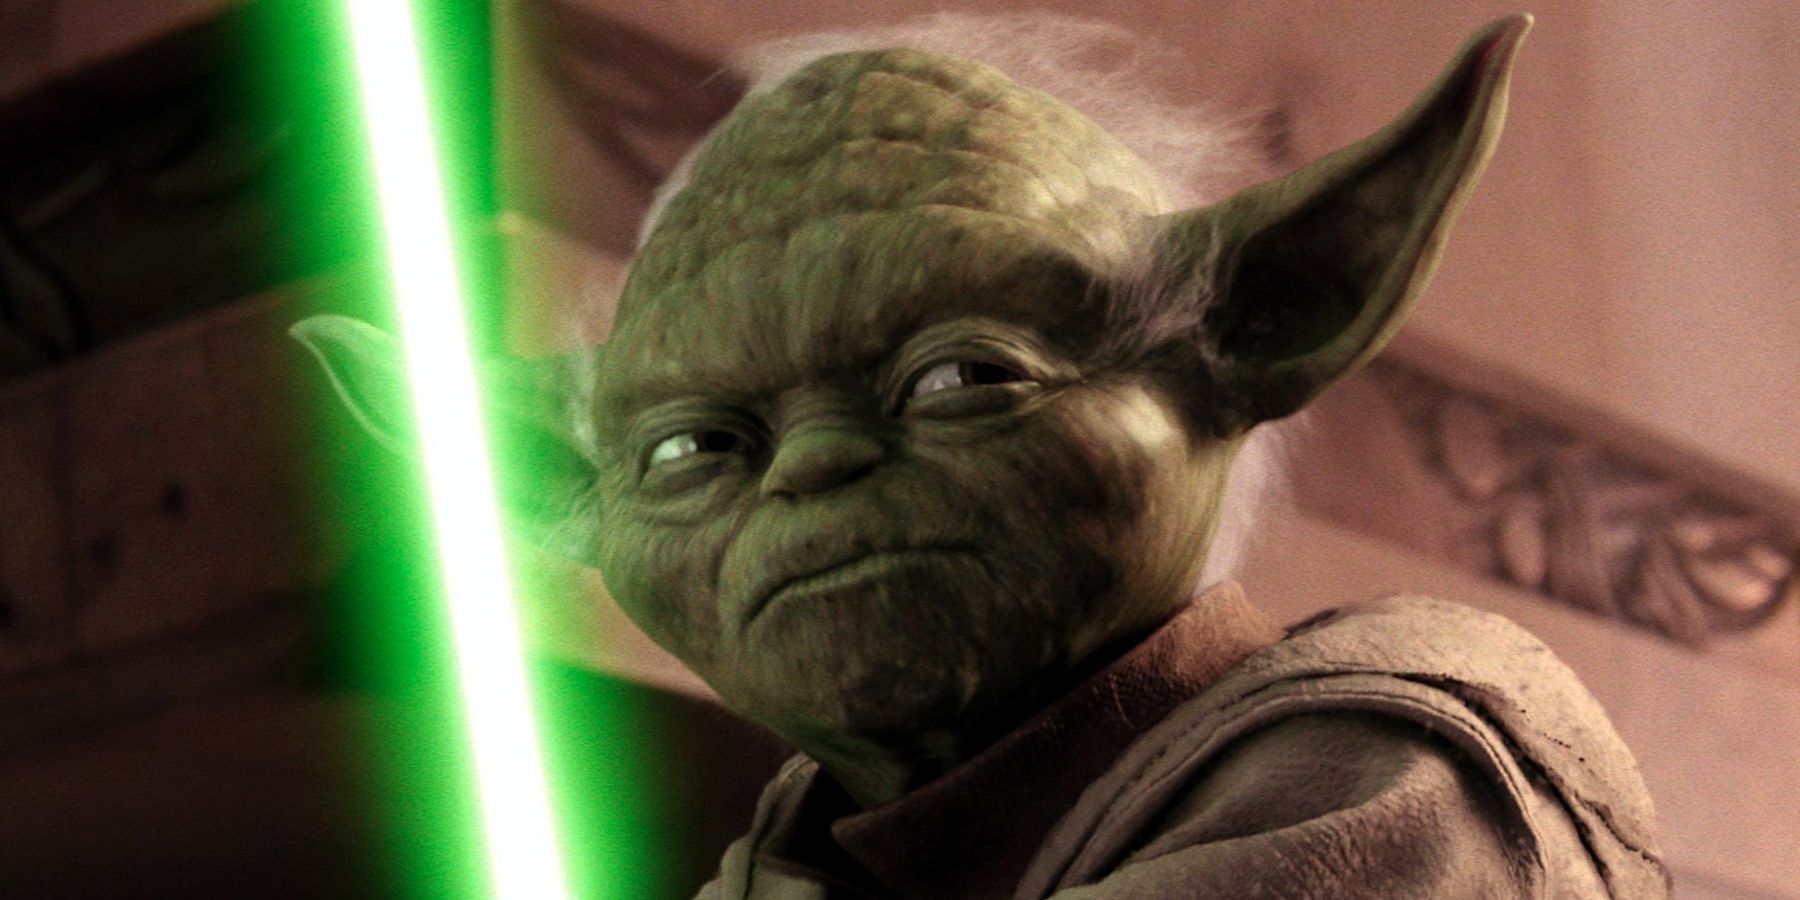 Yoda stands with his green lightsaber